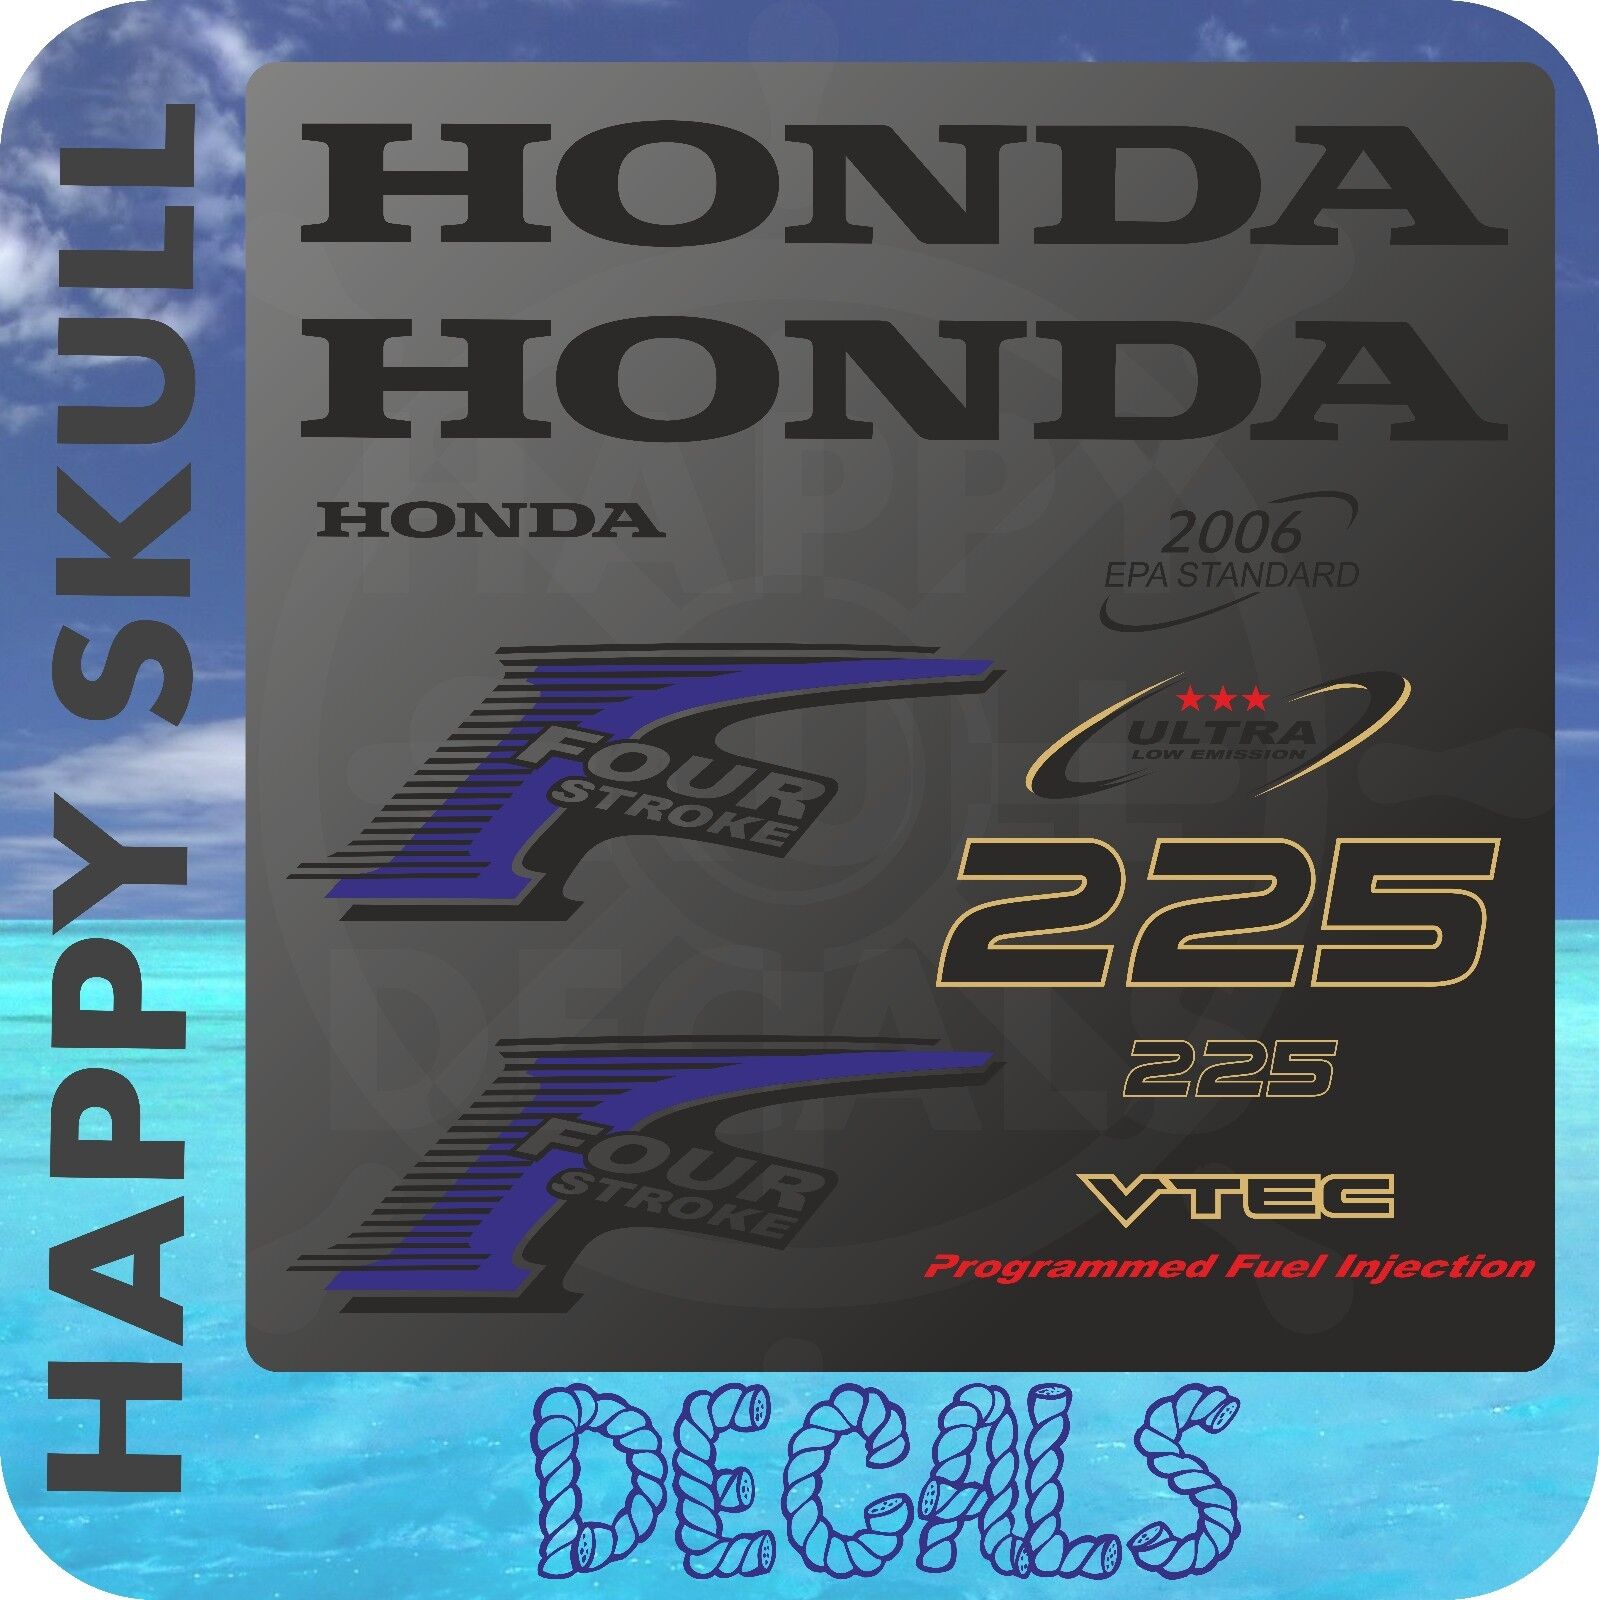 Honda 225 hp Four Stroke outboard engine decal sticker set reproduction